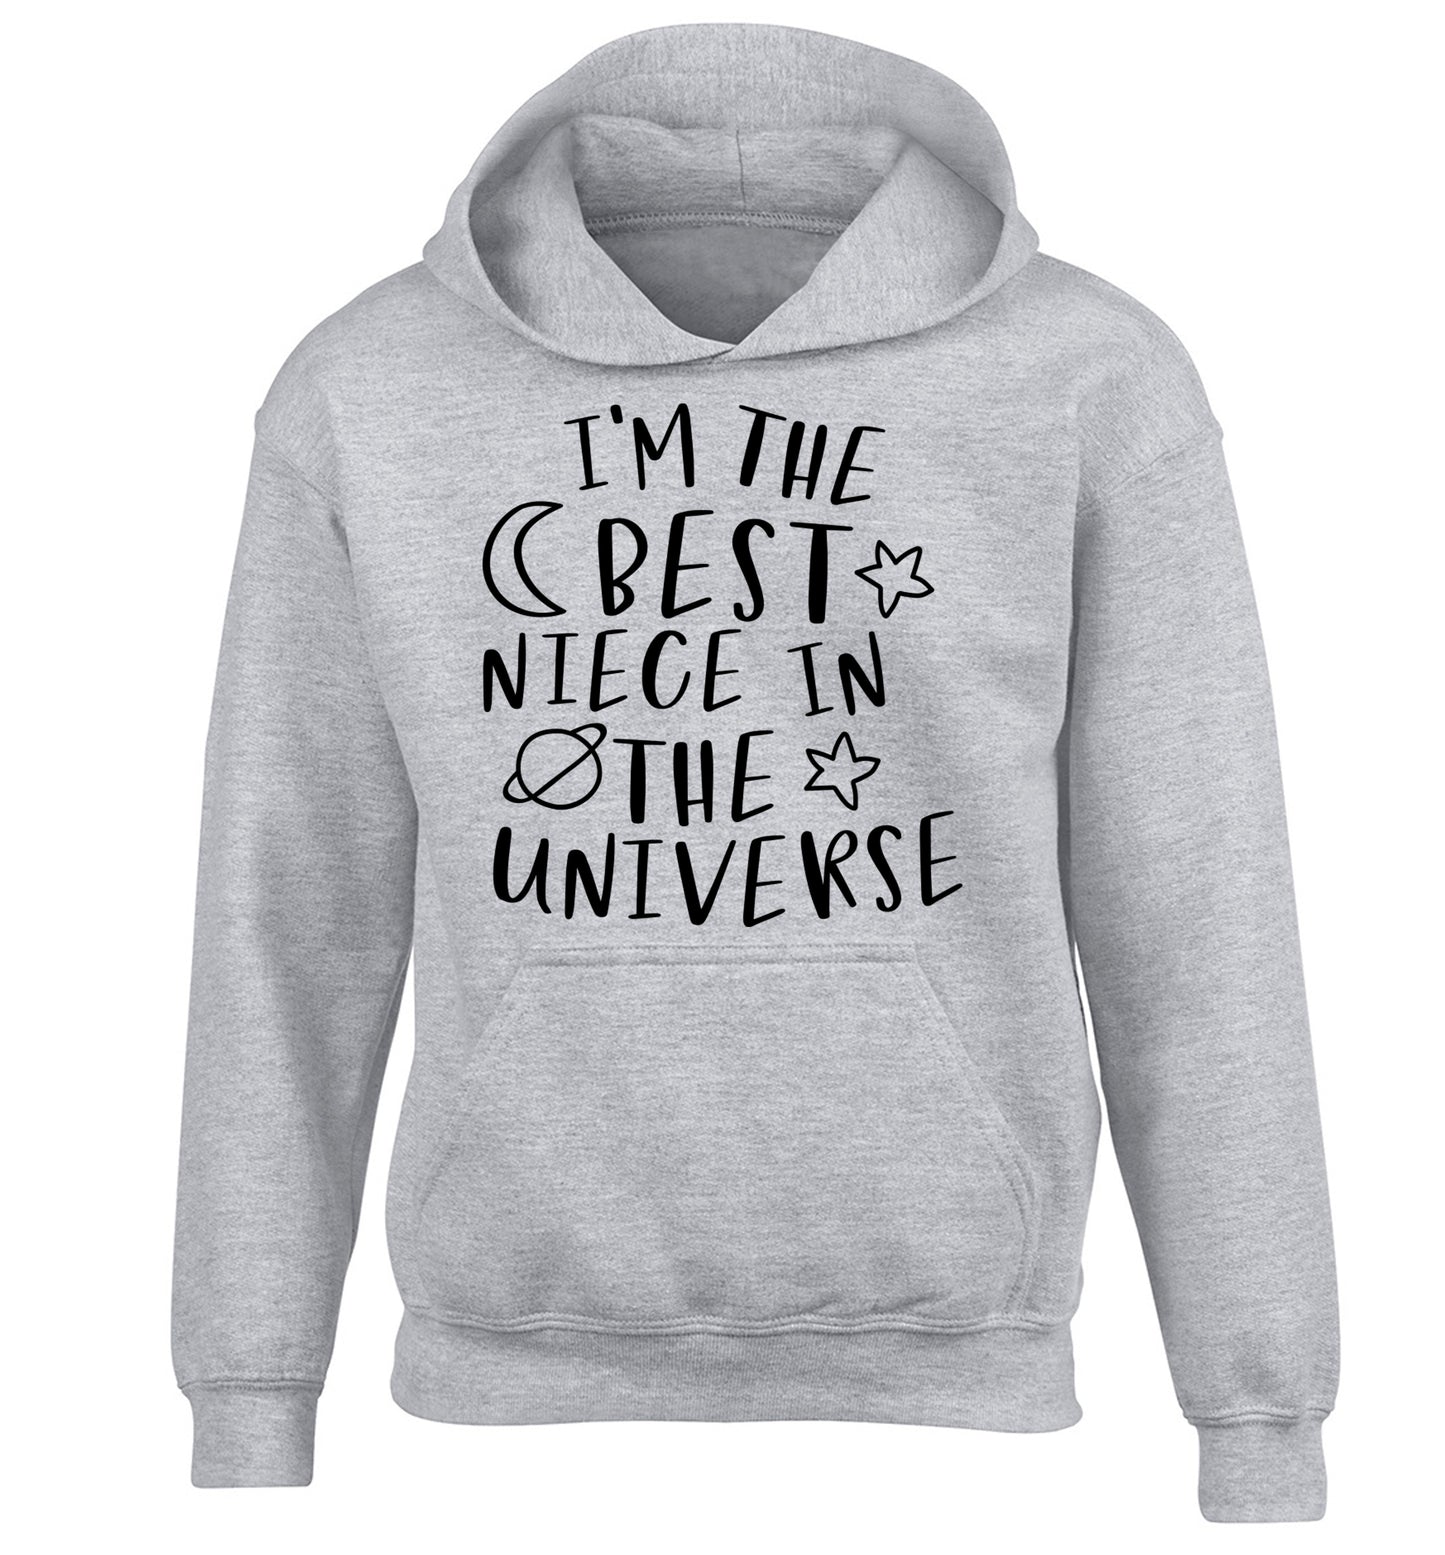 I'm the best niece in the universe children's grey hoodie 12-13 Years